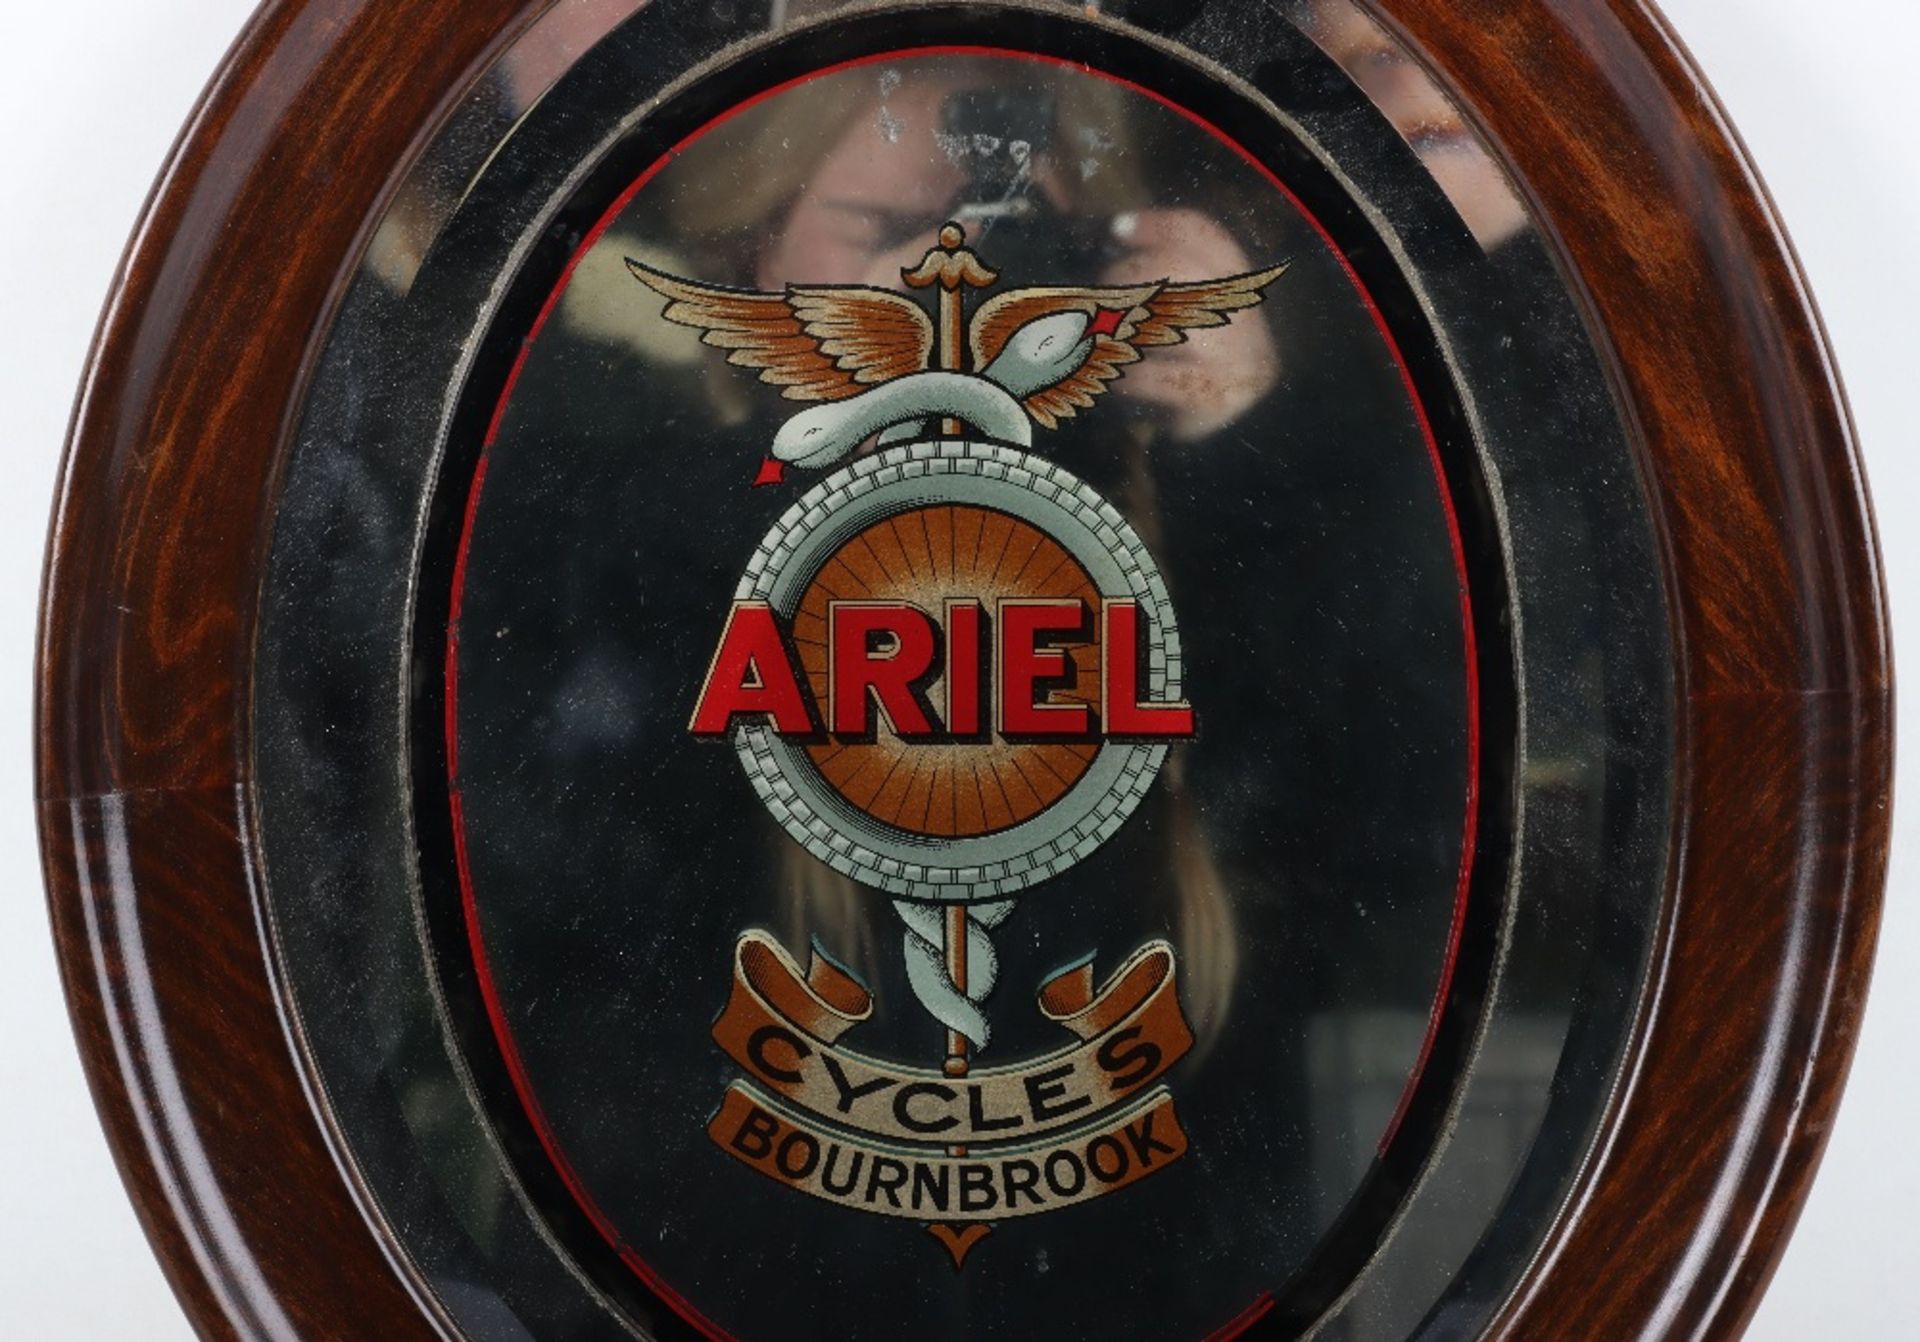 An Ariel Cycles Bournbrook oval advertising mirror - Image 4 of 5